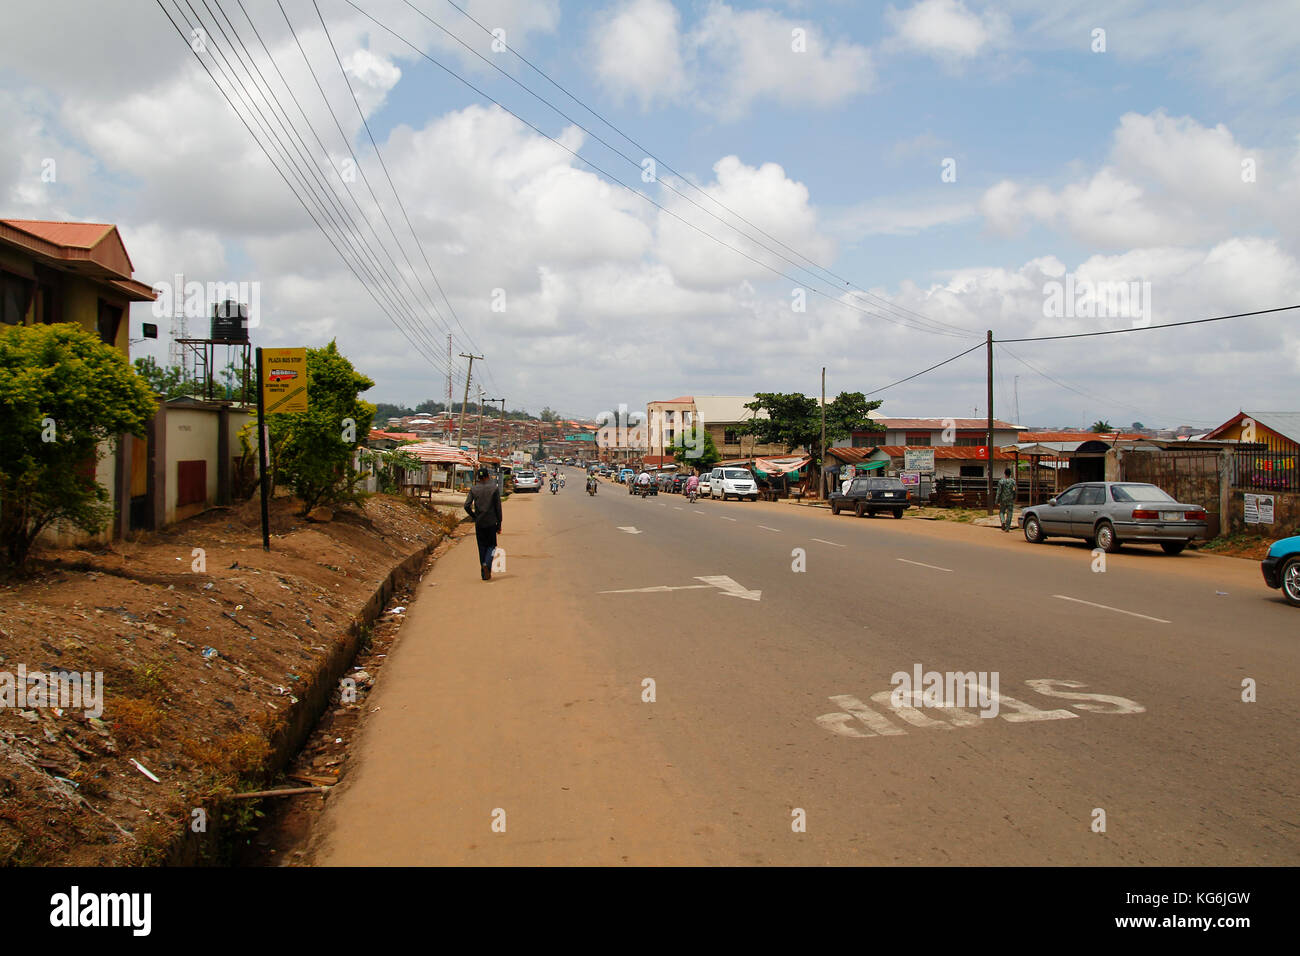 Street wiew of Akure in Ondo state, Nigeria, with cars and people walking next to the houses Stock Photo